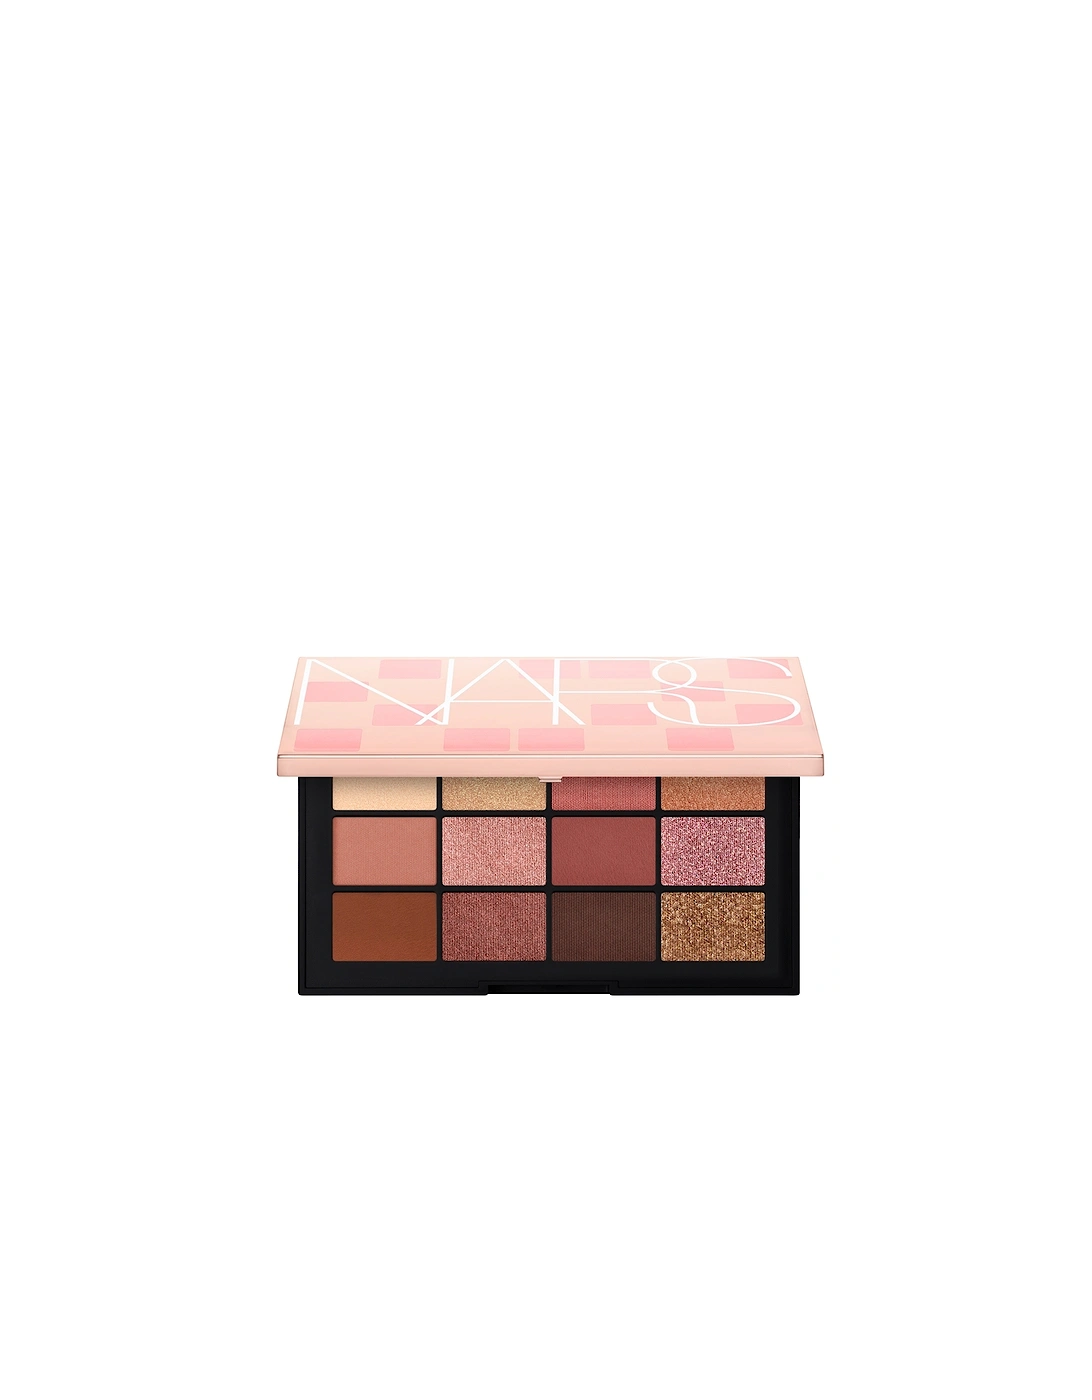 Afterglow Irresistible Eyeshadow Palette 12g, 2 of 1